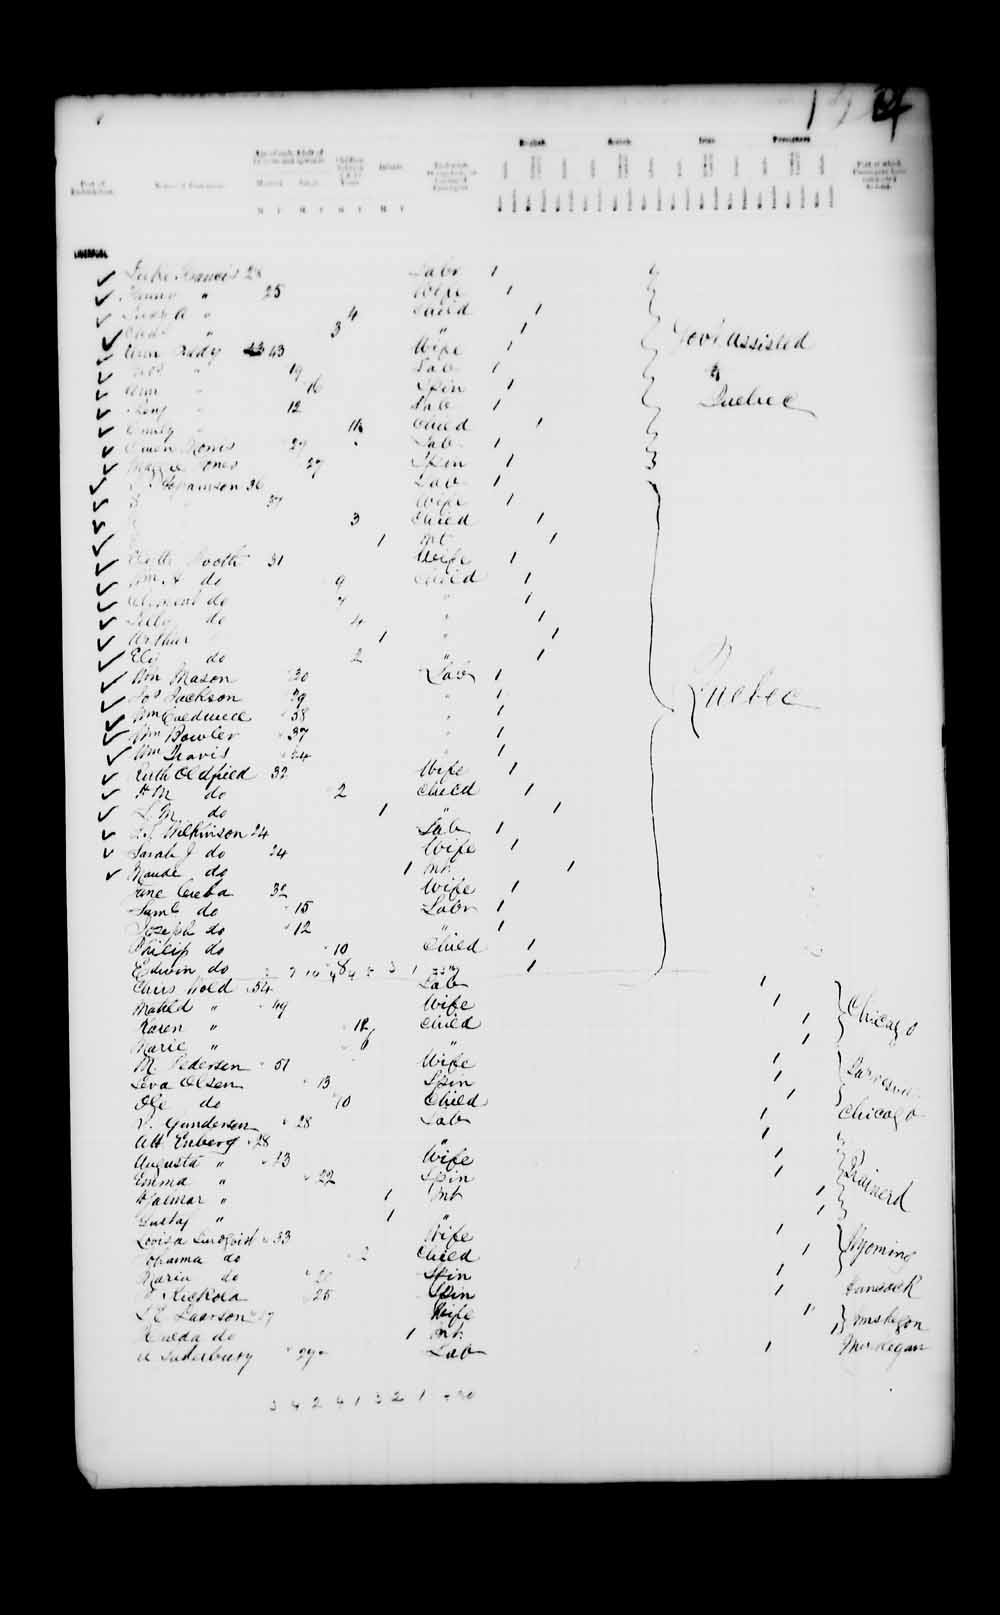 Digitized page of Passenger Lists for Image No.: e003541215